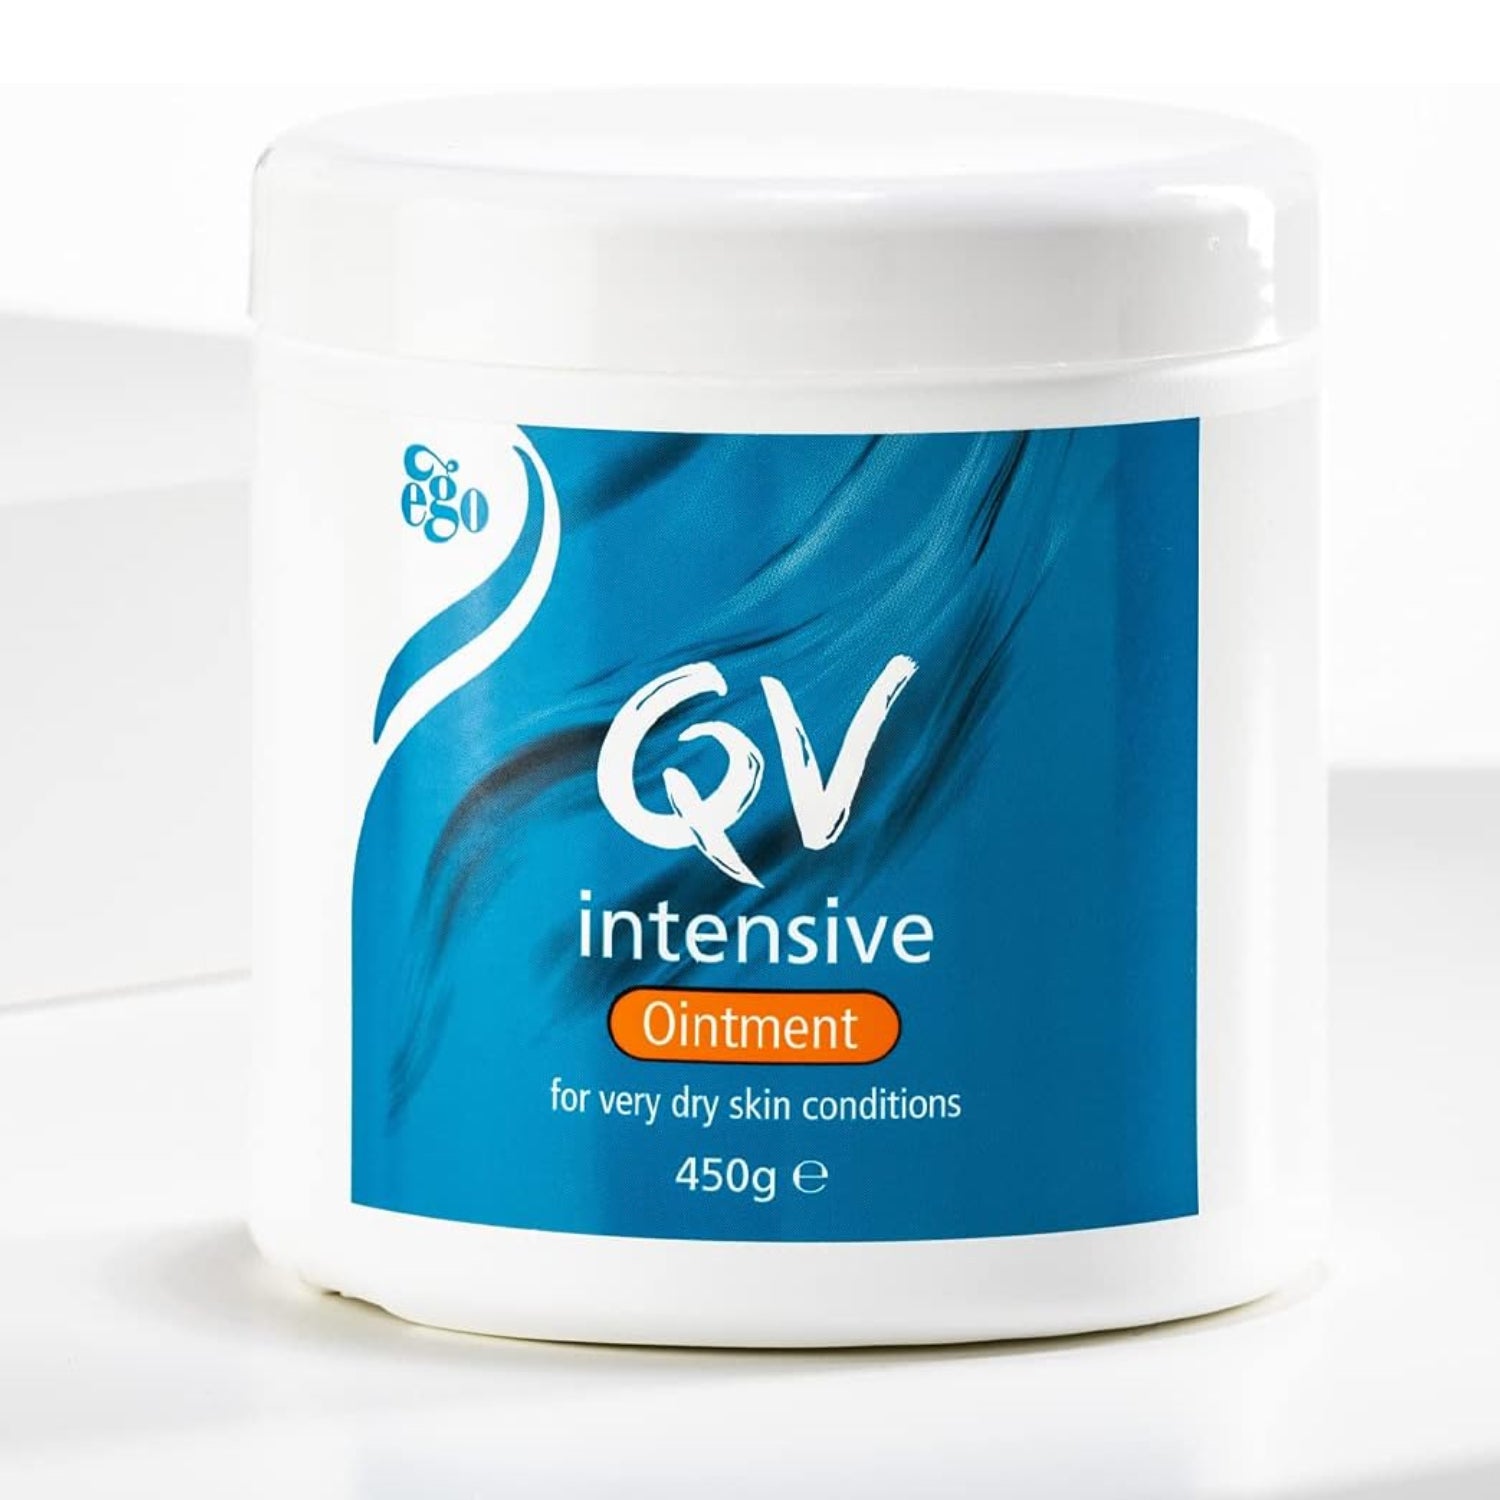 QV Intensive Ointment 450g, Helps to Protect and Soothe Dry and Sensitive Skin, Sting Free, Ideal for Drier Areas